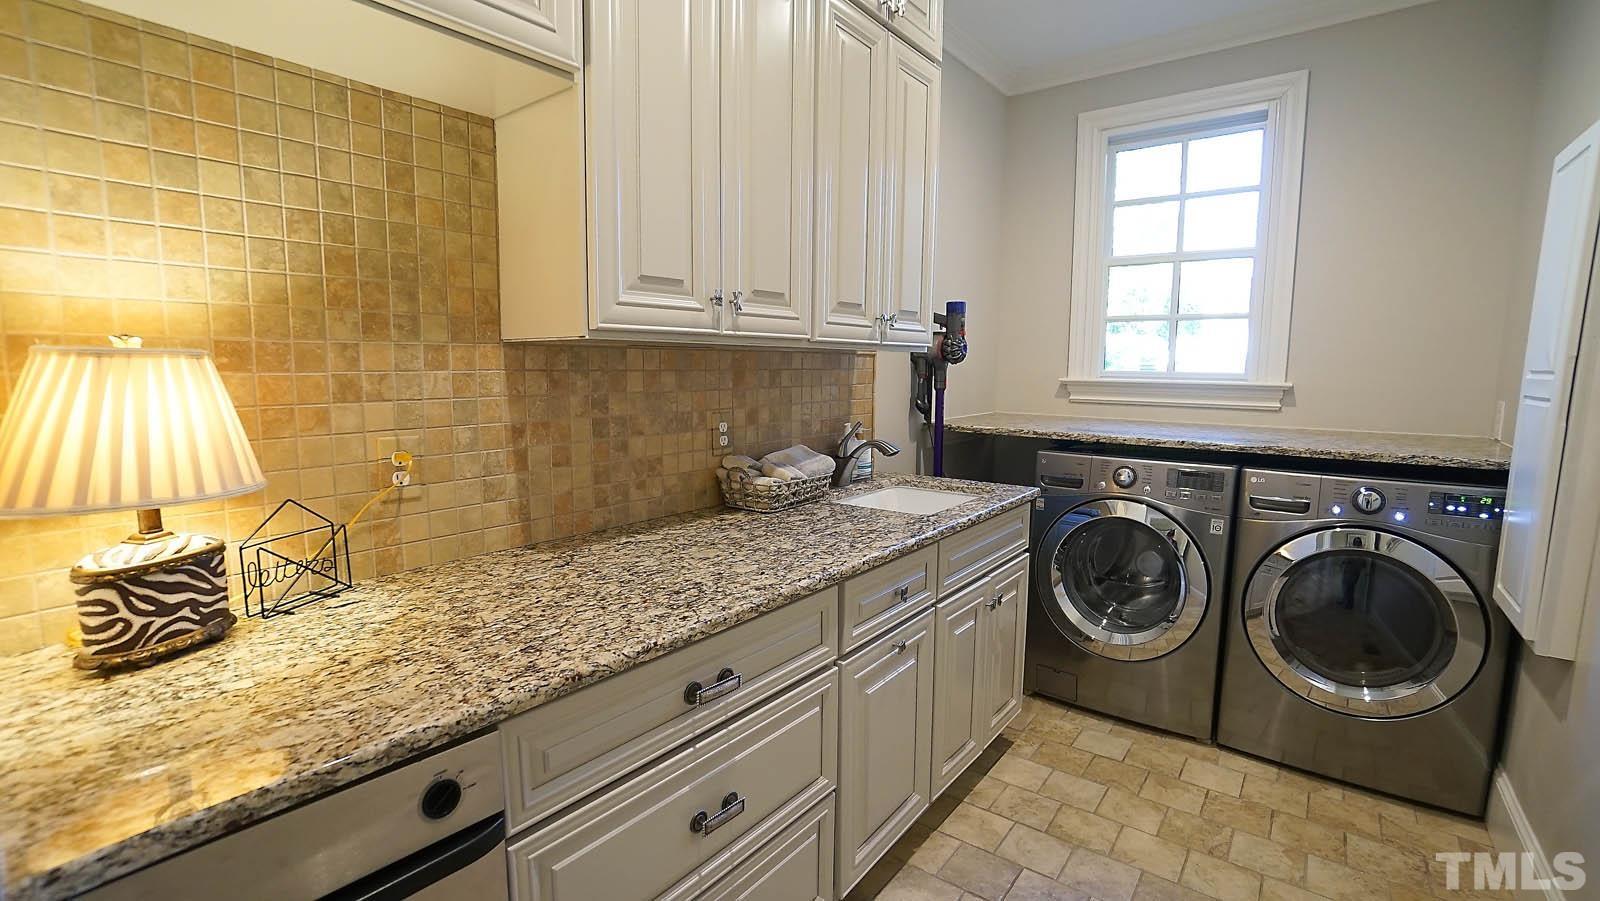 Laundry room with tons of cabinets, granite counters and tile flooring